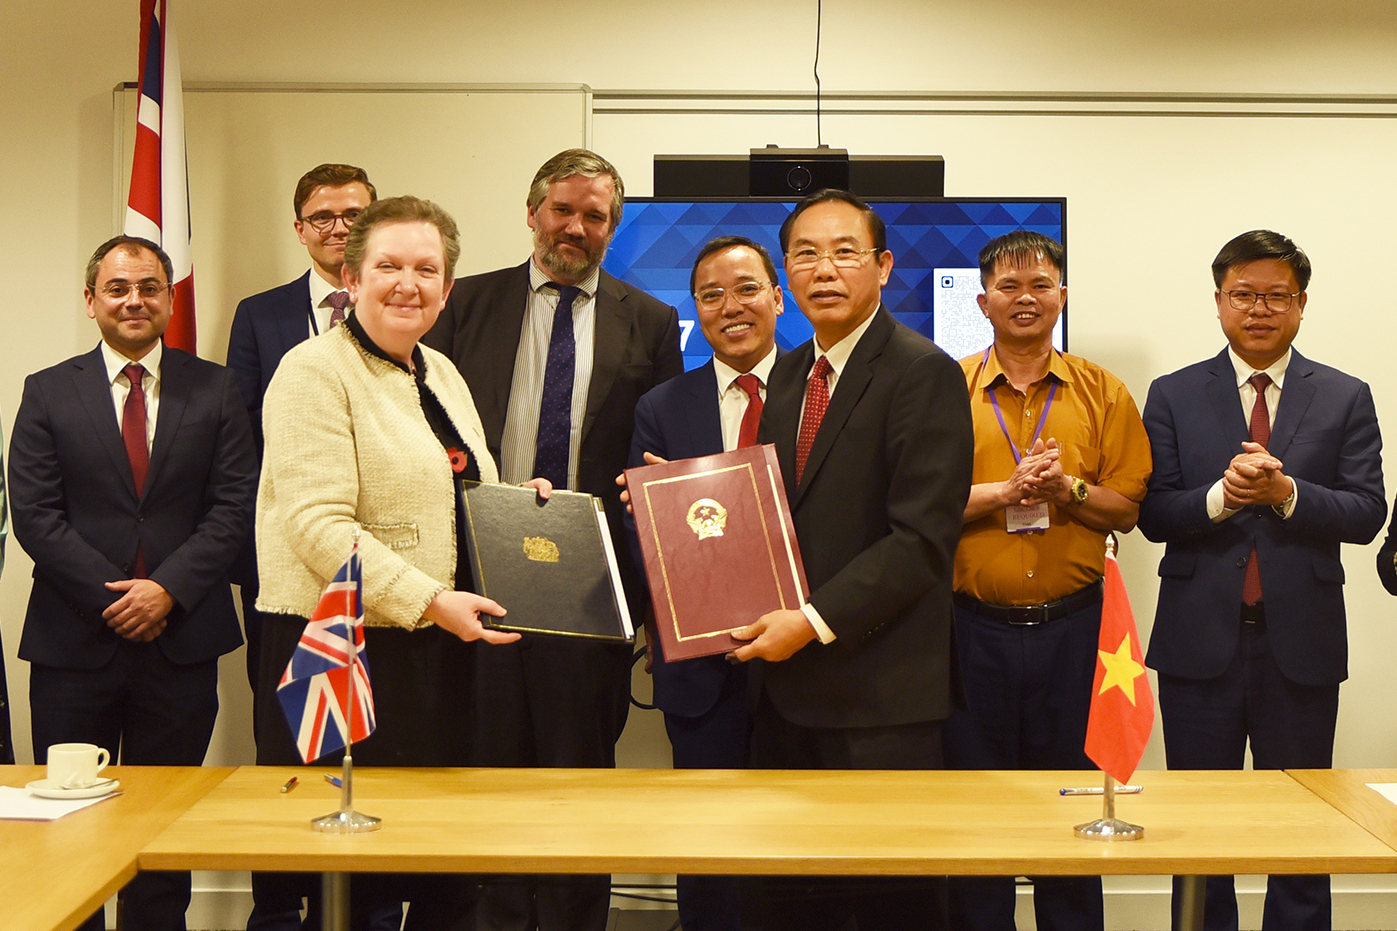 Deputy Minister Phung Duc Tien signed a cooperation agreement with a representative of the United Kingdom's Department of Environment and Food and Rural Affairs. Photo: NT.